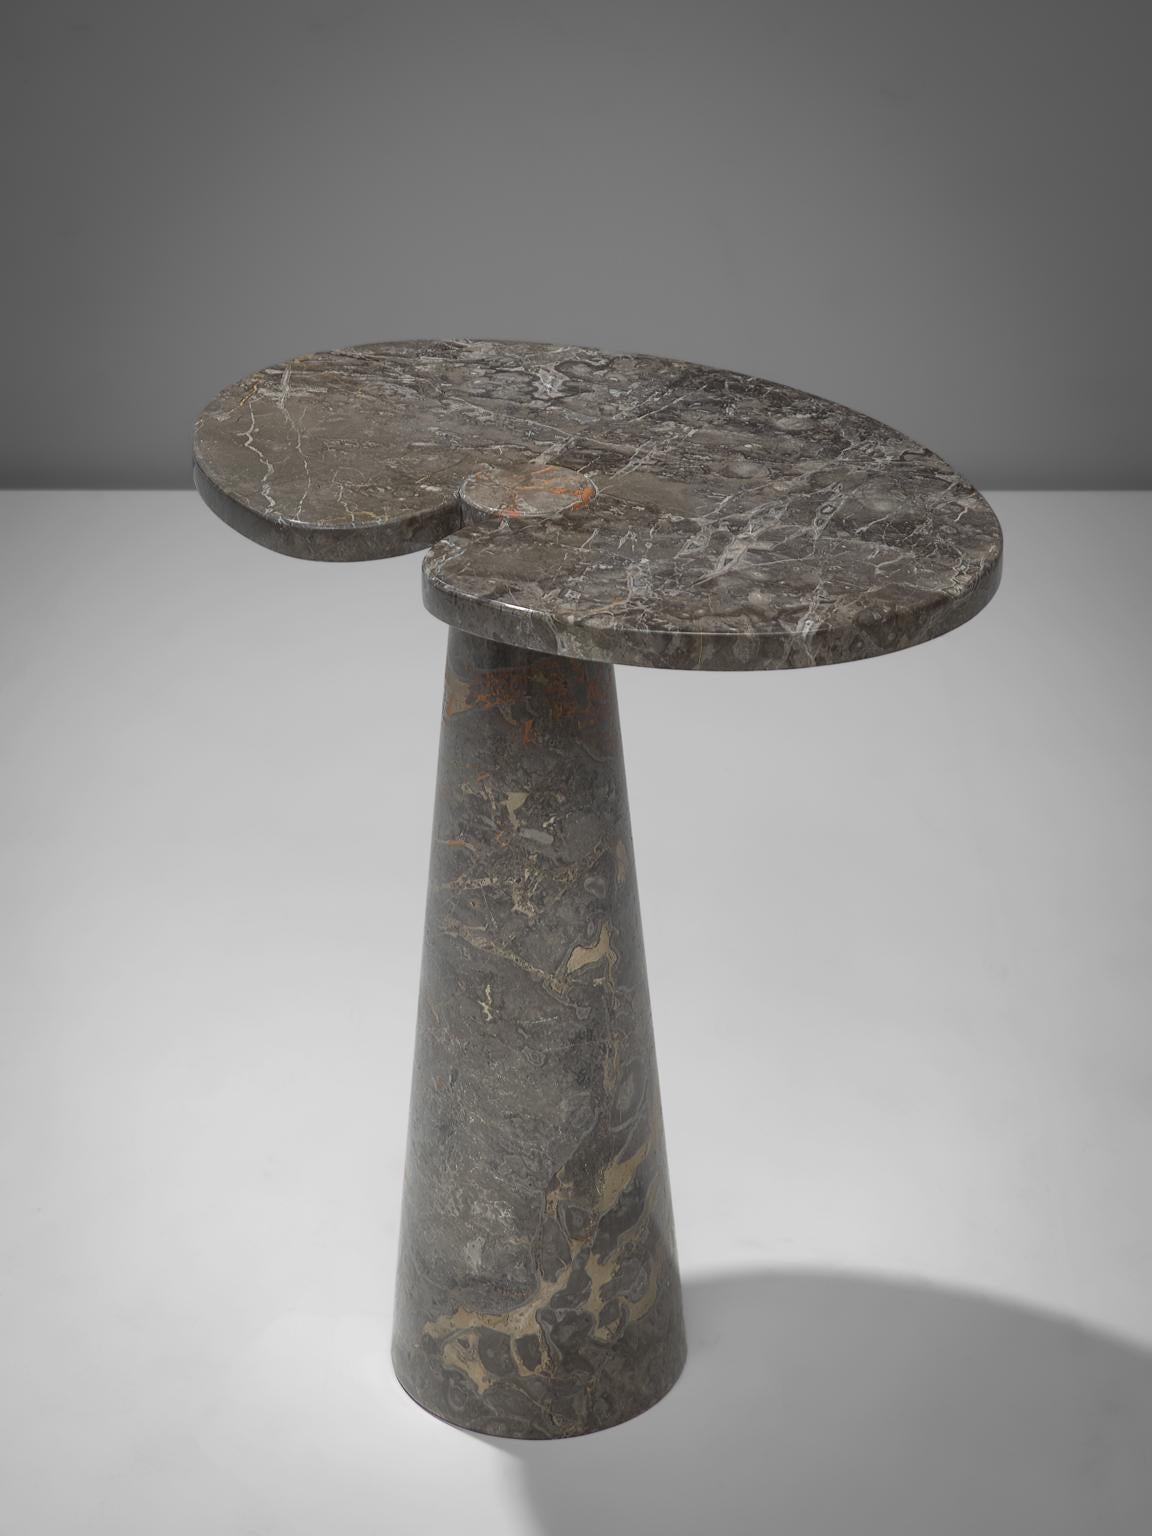 Angelo Mangiarotti, Cocktail Table in grey marble, Italy, 1970s. 

This sculptural table by Angelo Mangiarotti is a skillful example of postmodern design. The lotus leaf like side table features no joints or clamps and is architectural in its